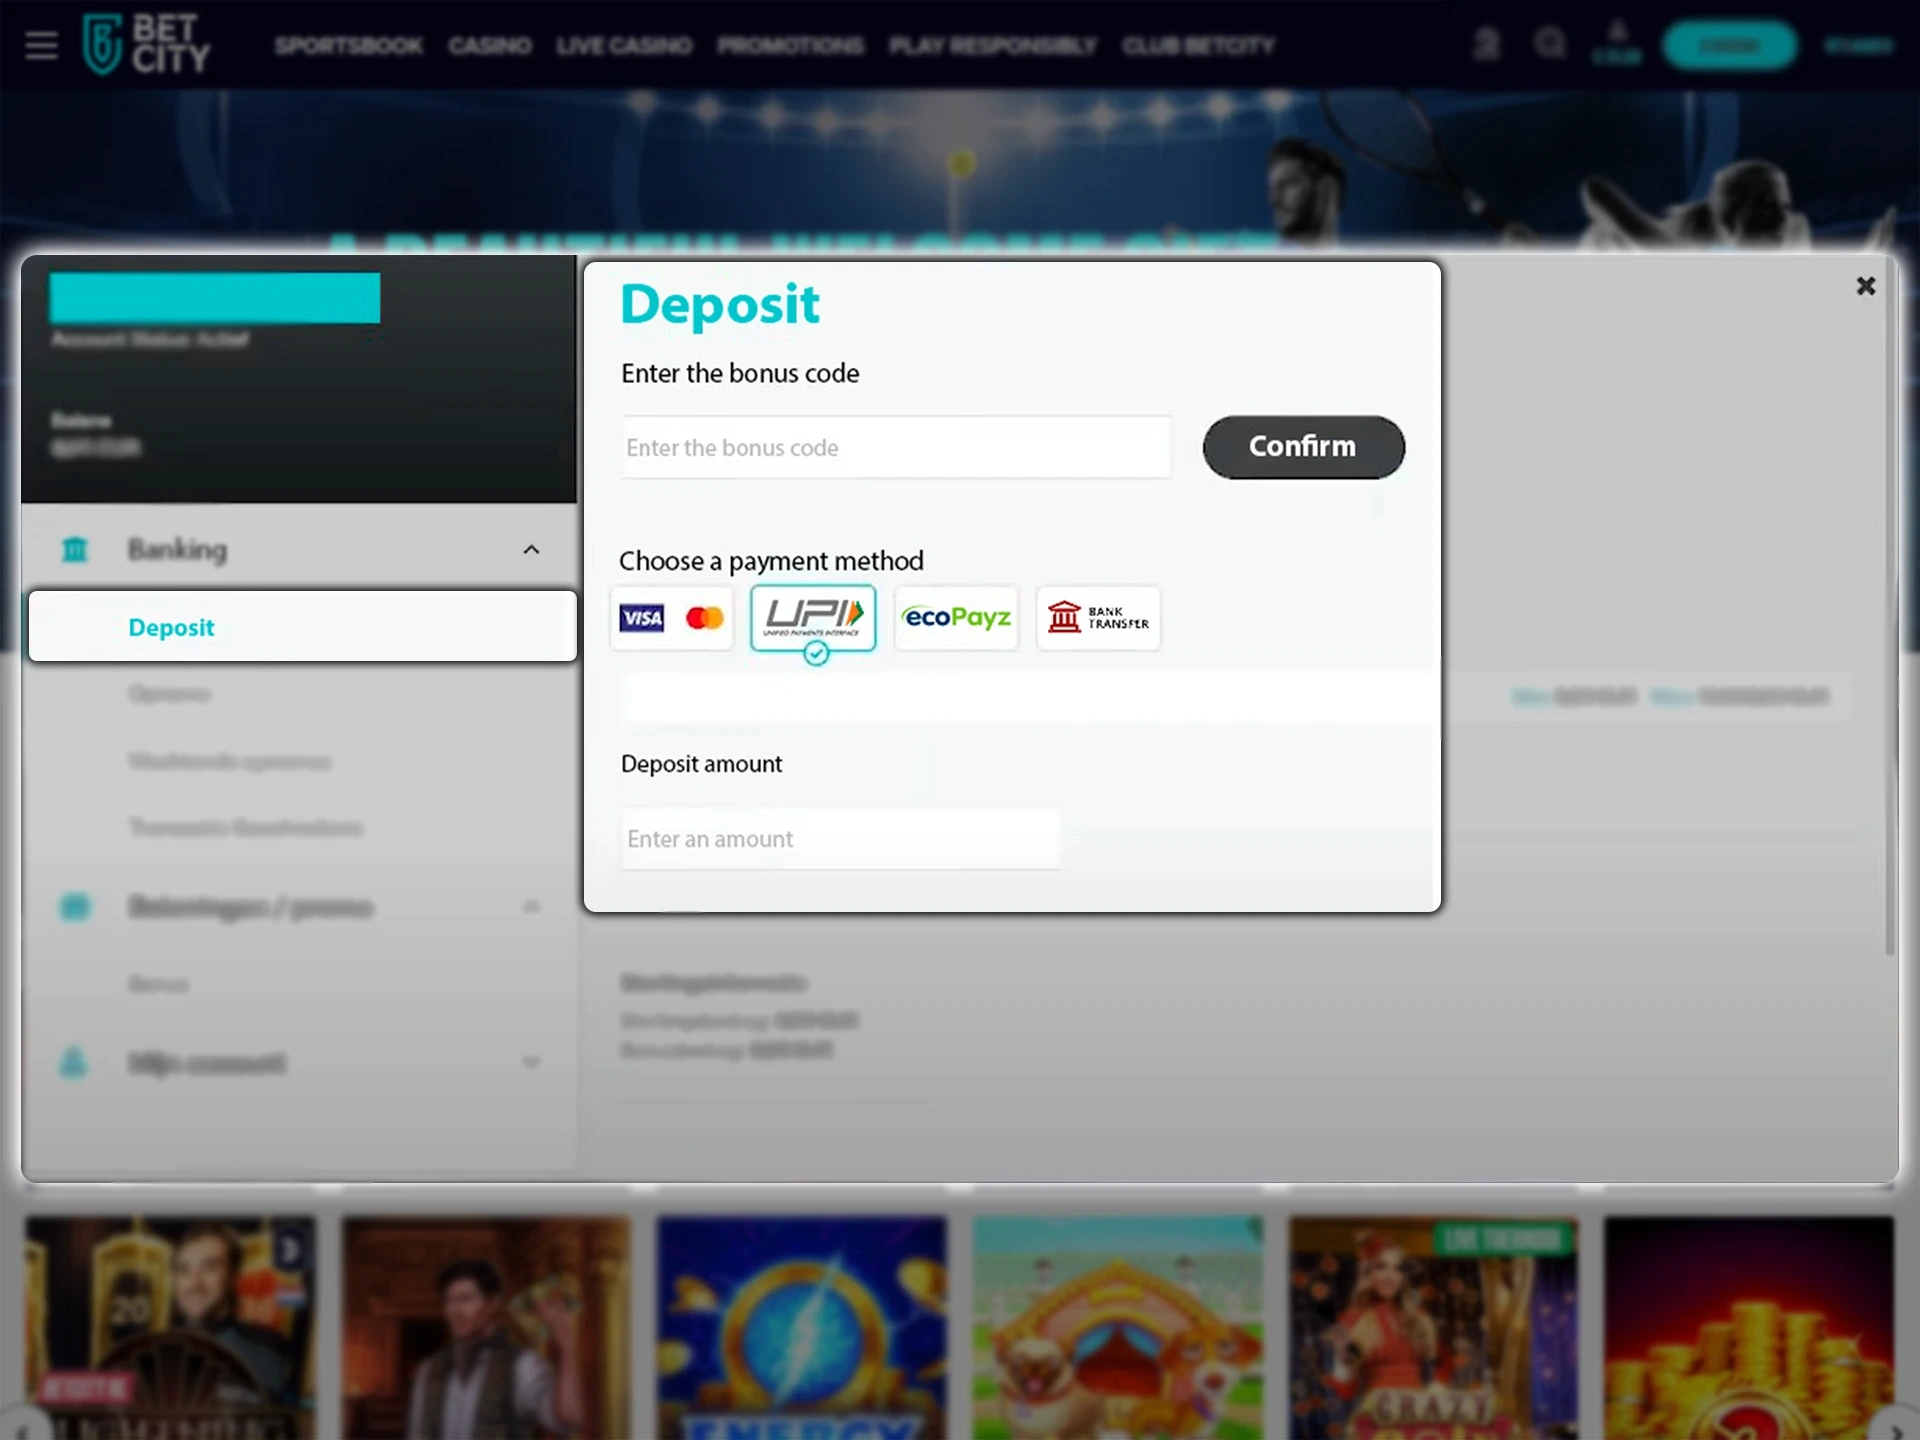 Fund your Betcity account with the amount required to receive the bonus.